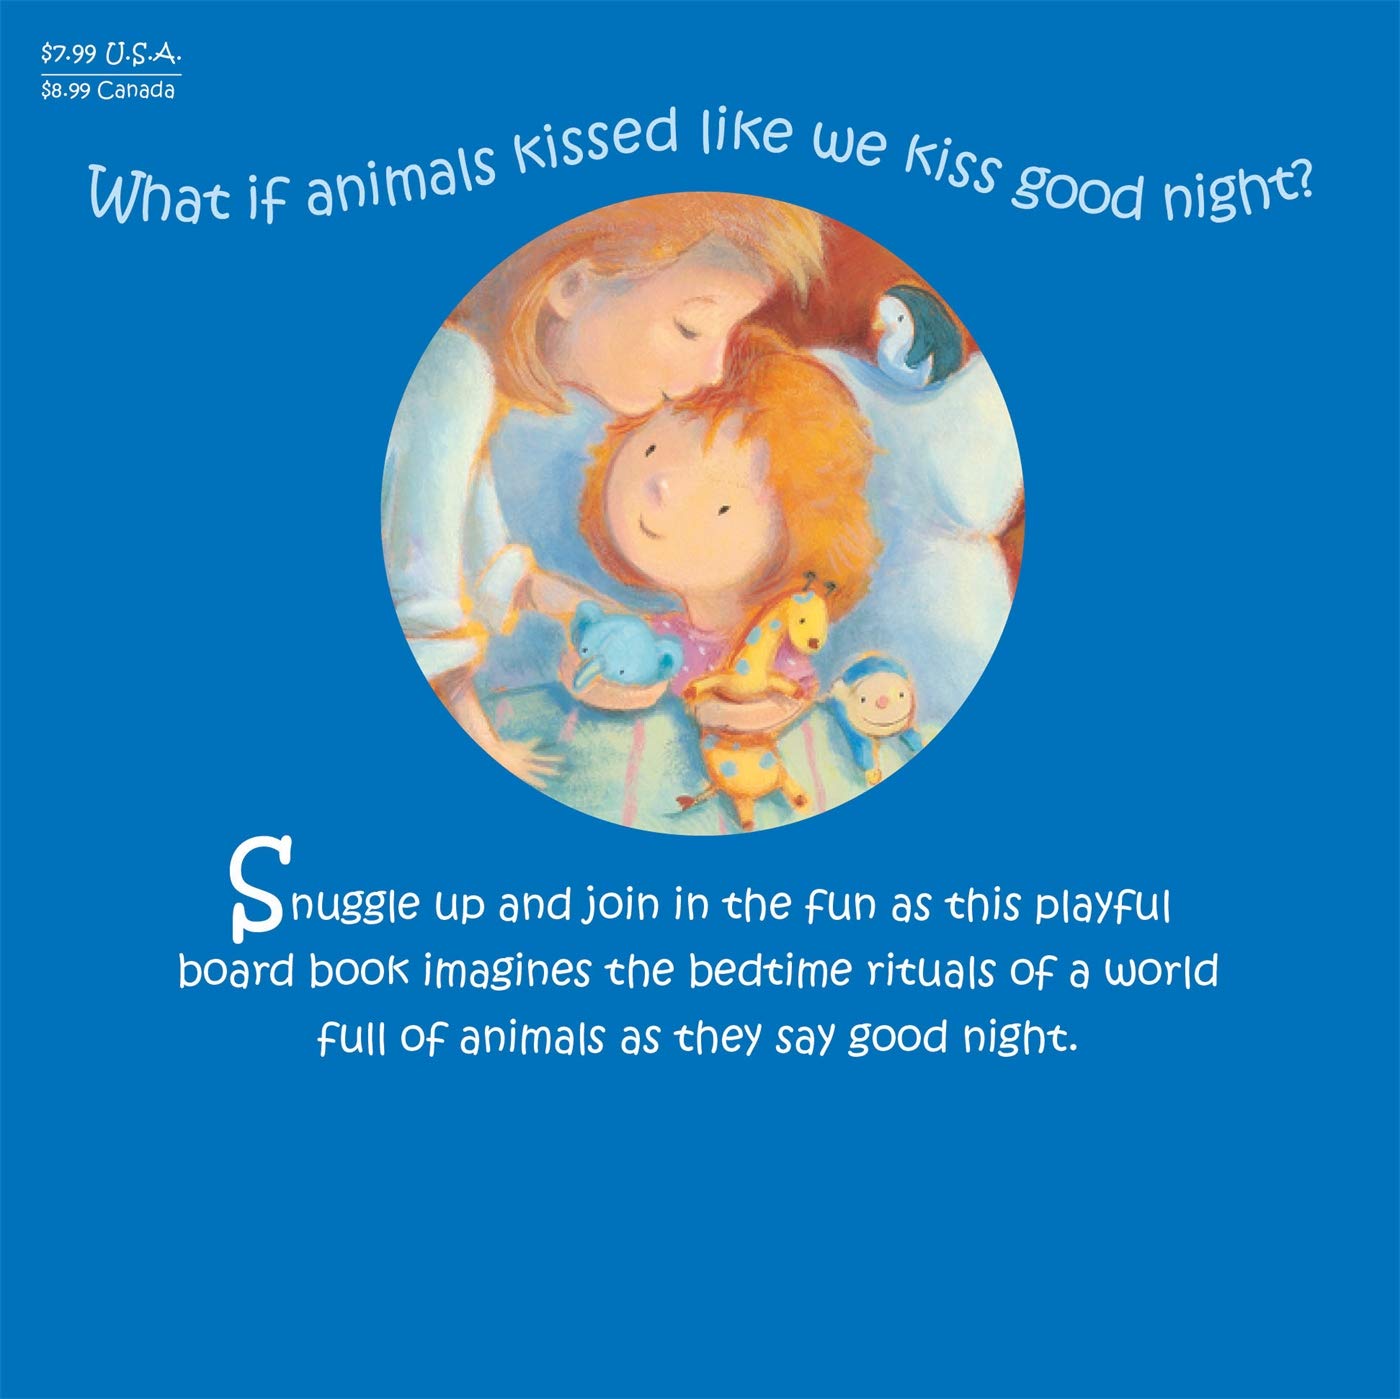 Interactive children's books with puzzles, lift-the-flap and peek-through options for an enjoyable pre-bedtime read!